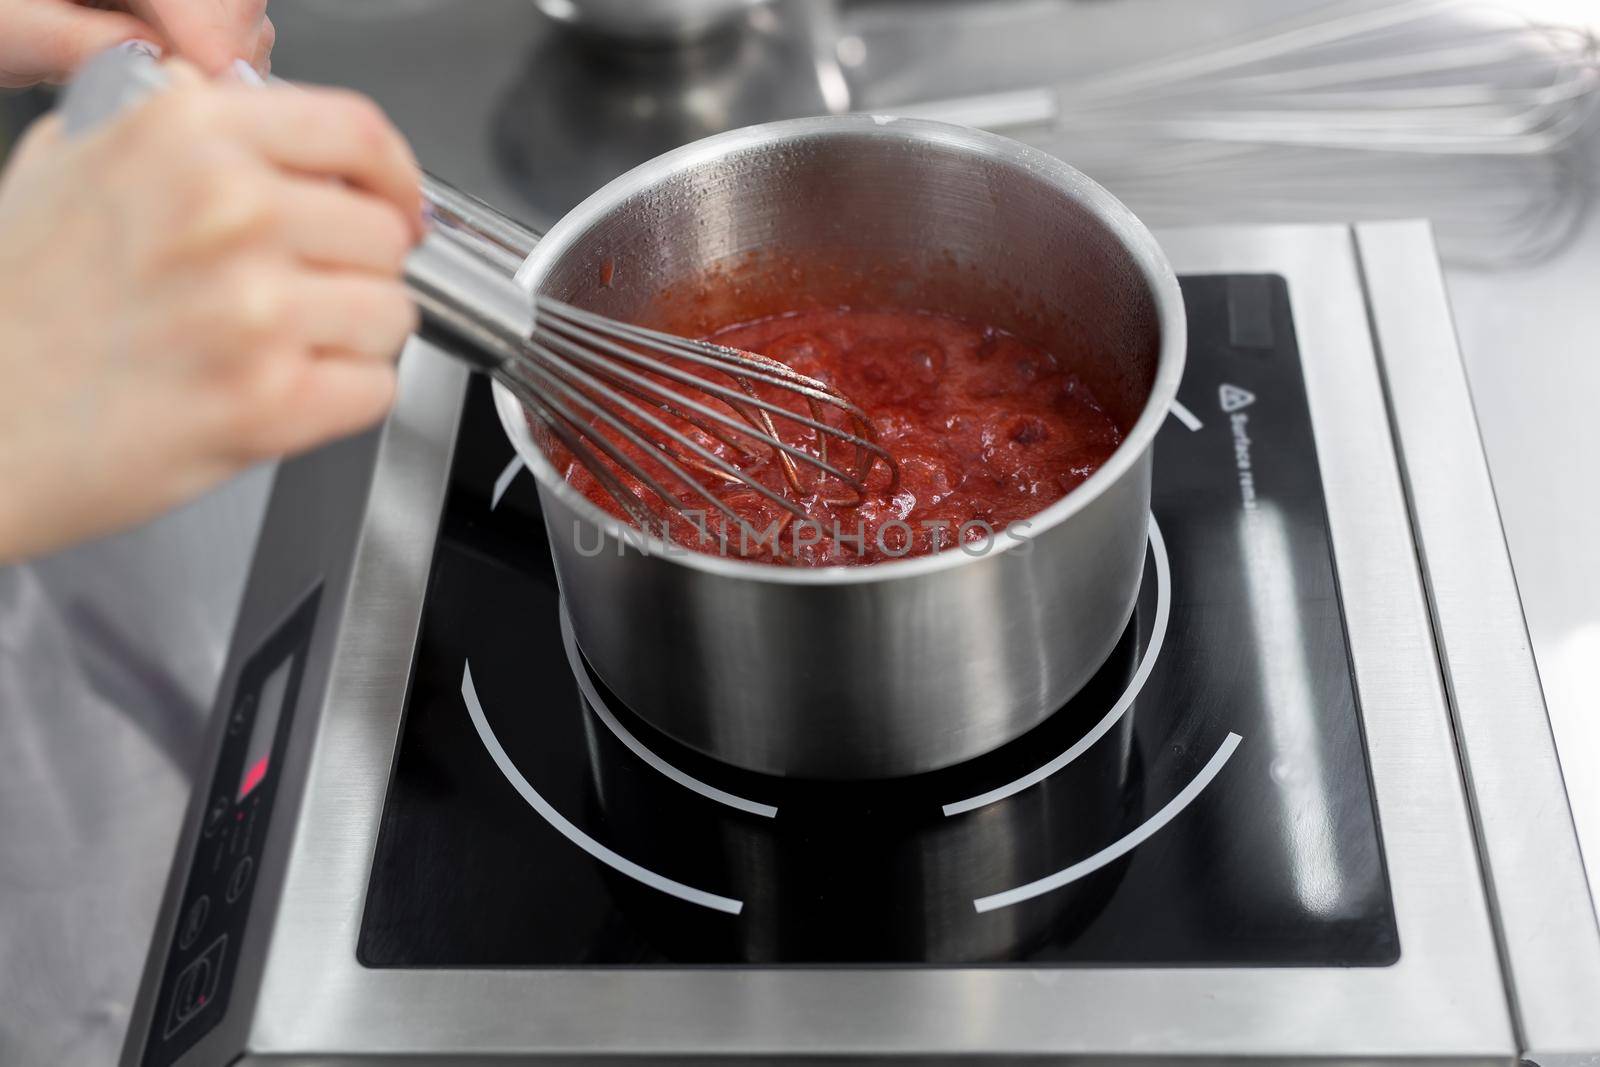 Pastry chef cooks strawberry puree with sugar in a saucepan.